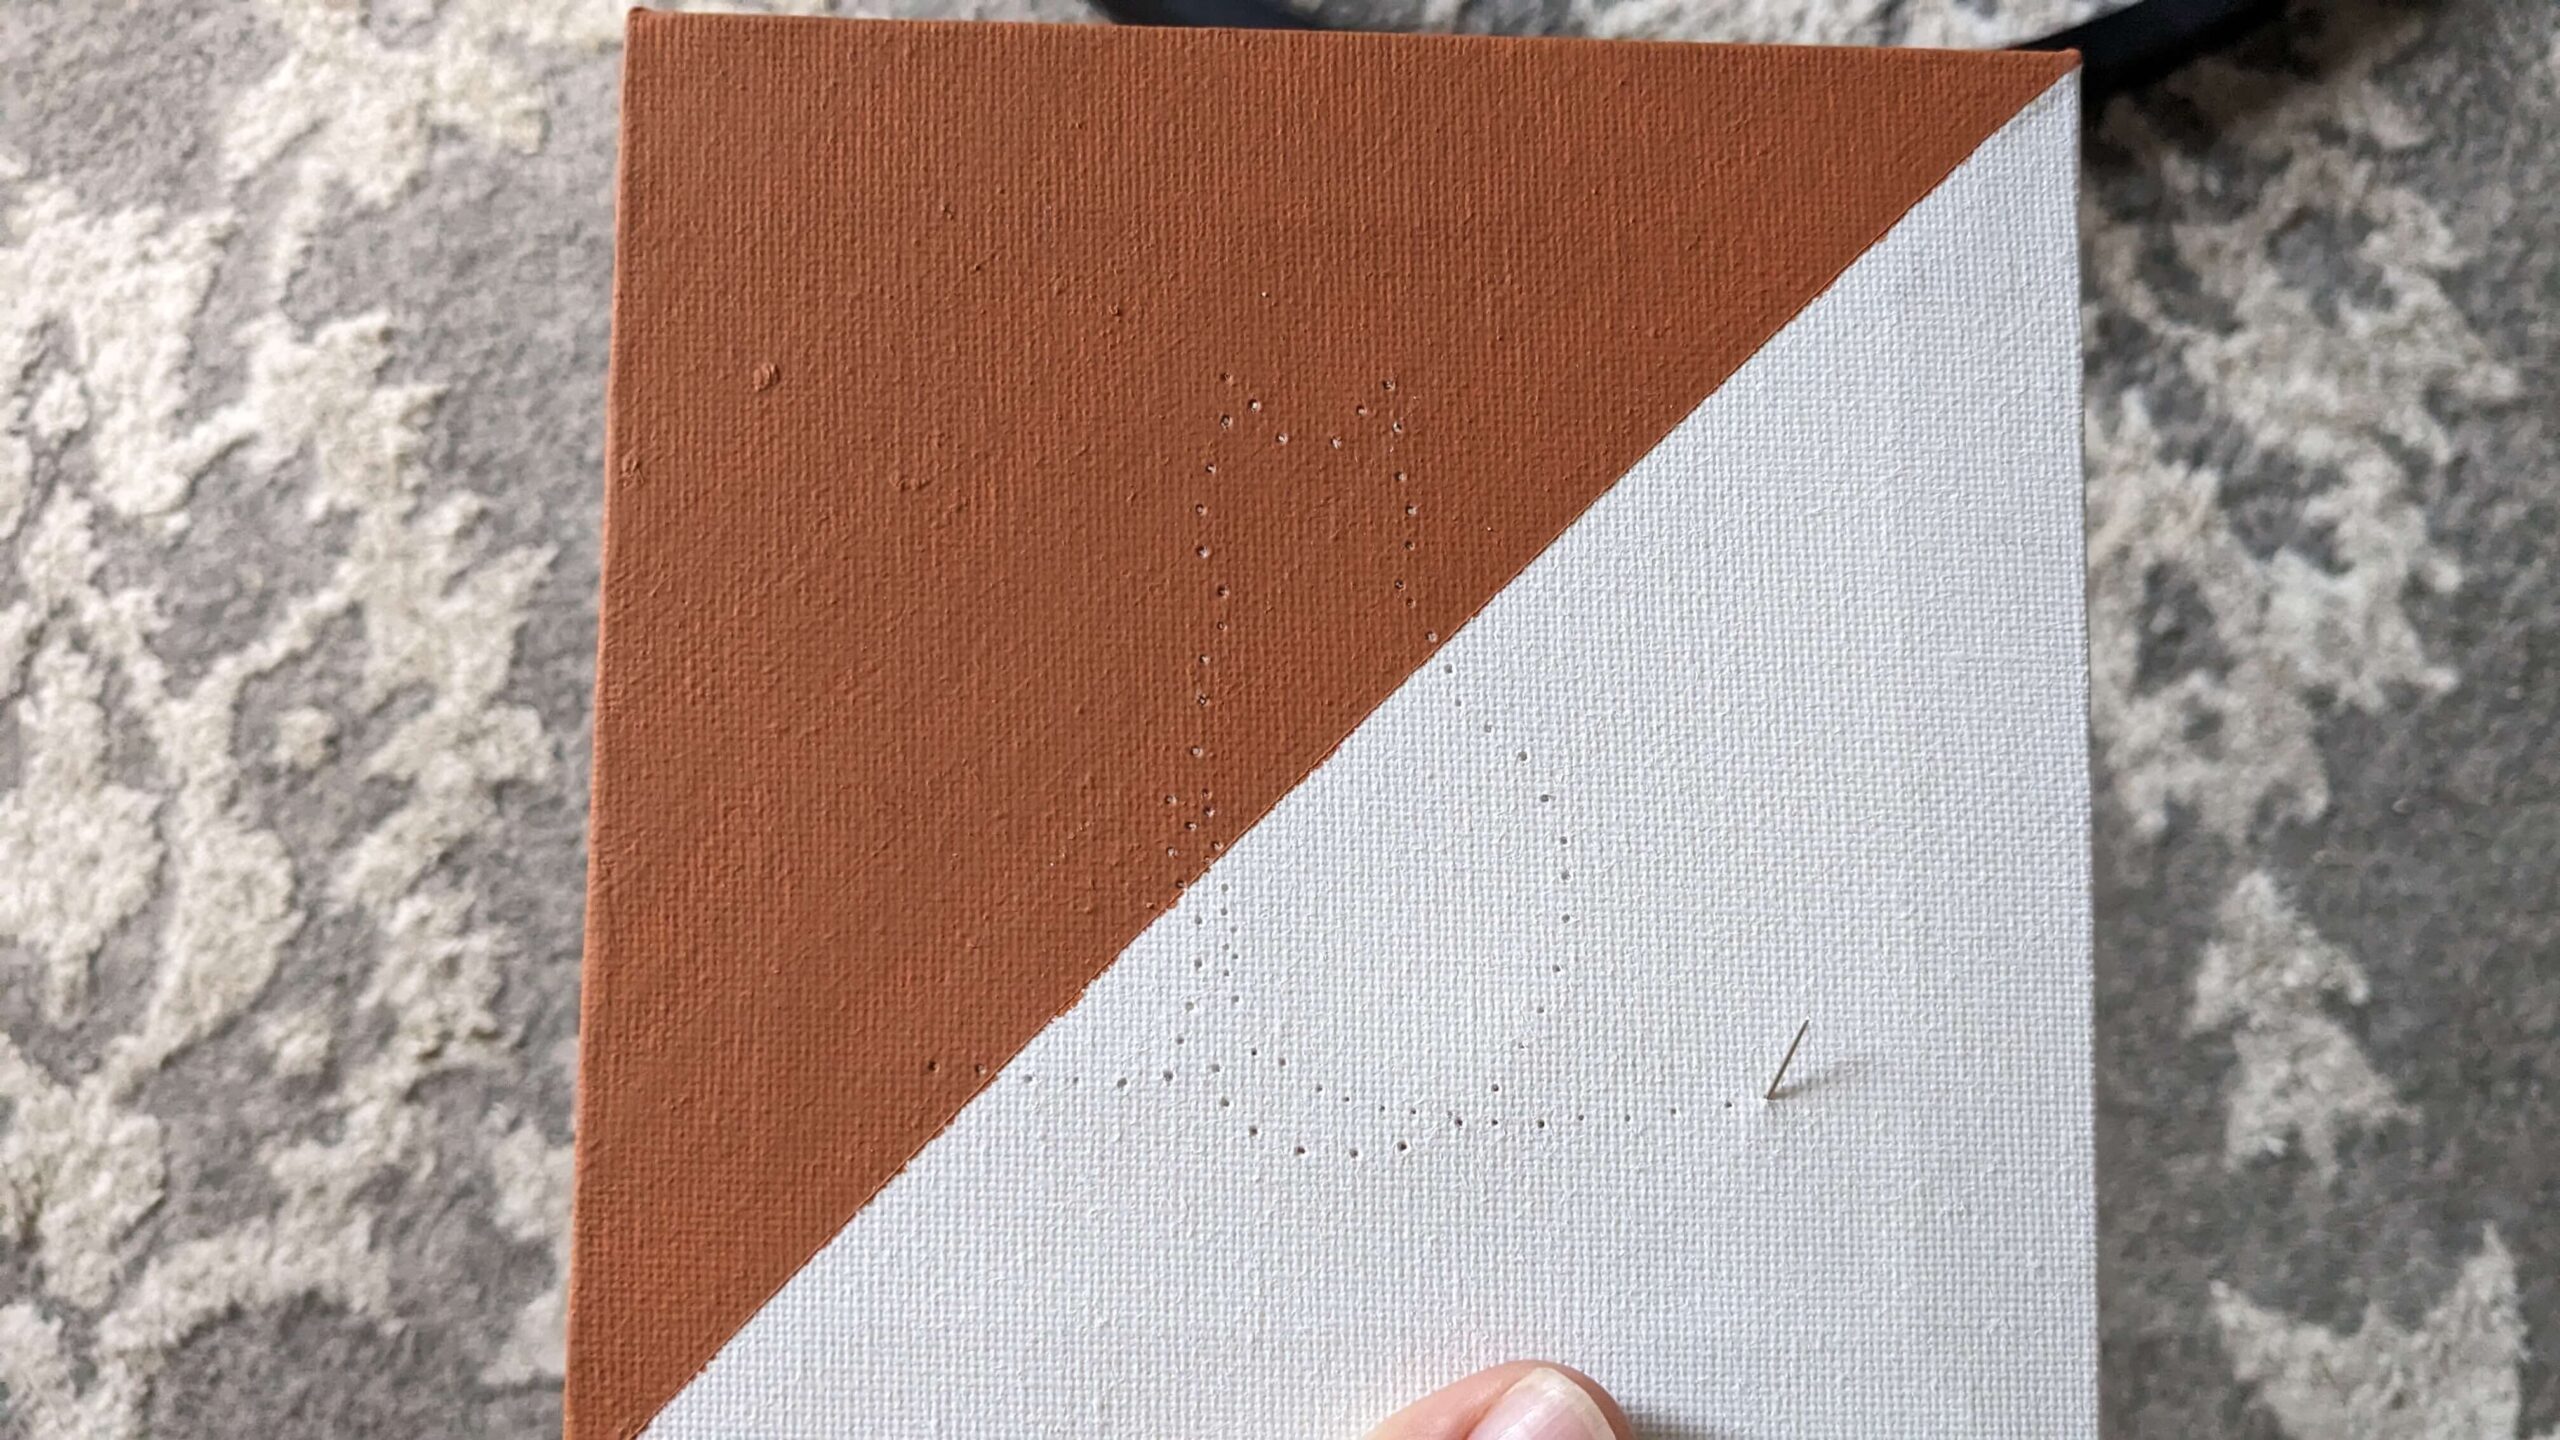 a needle poking through a hole in a square canvas that is diagonally painted half orange half white